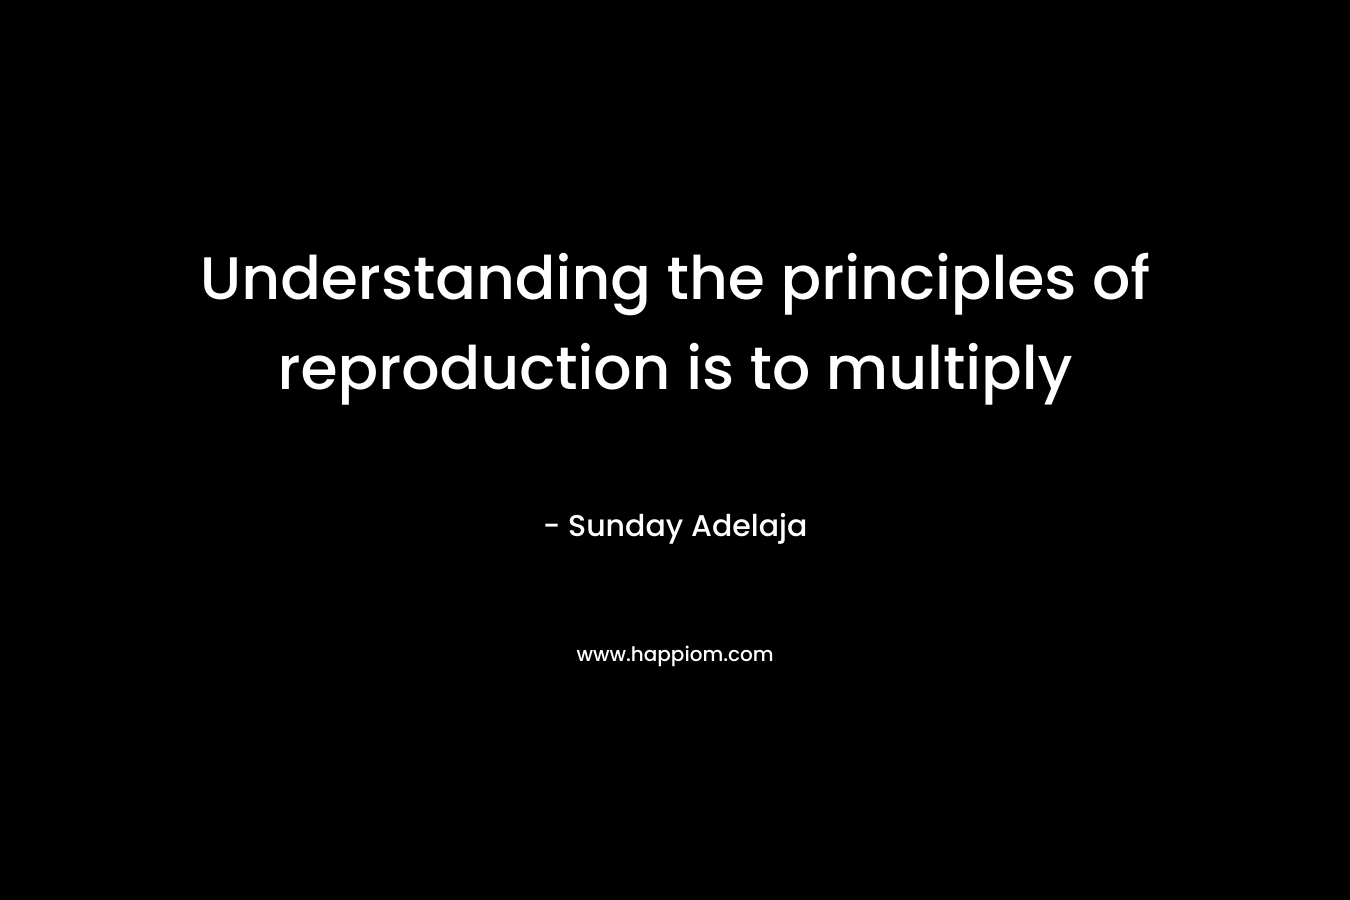 Understanding the principles of reproduction is to multiply